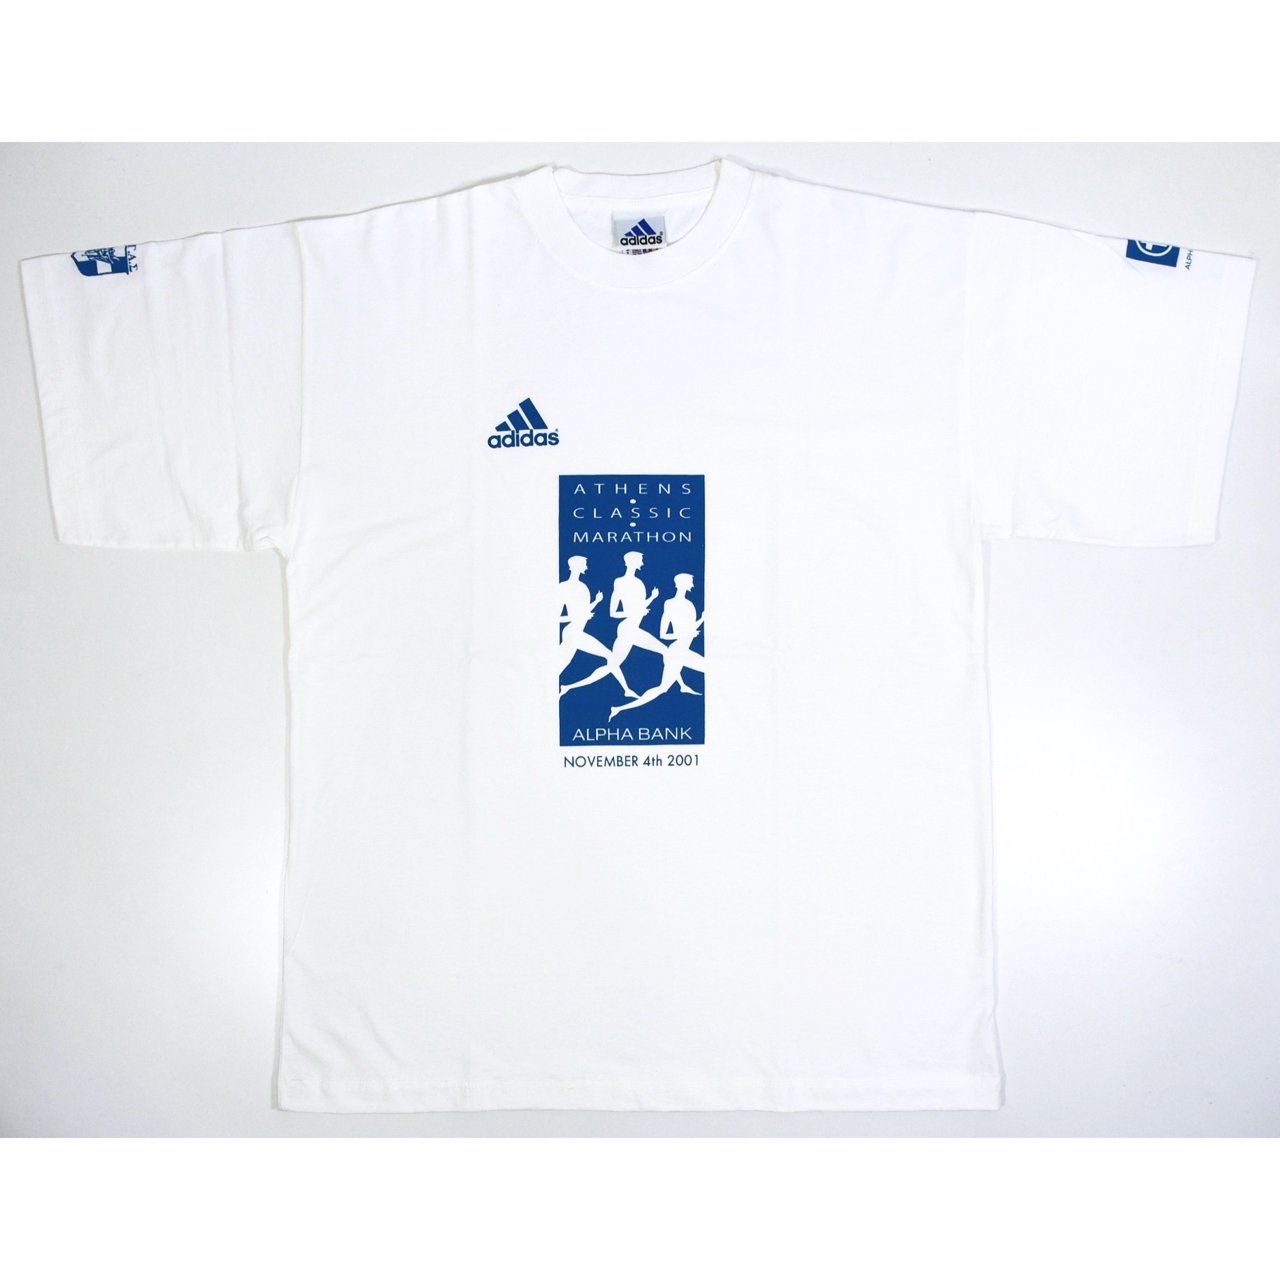 NOS 2001 ADIDAS ATHENS CLASSIC MARATHON S/S Tee XL MADE IN GREECE - MISSION  WEB STORE